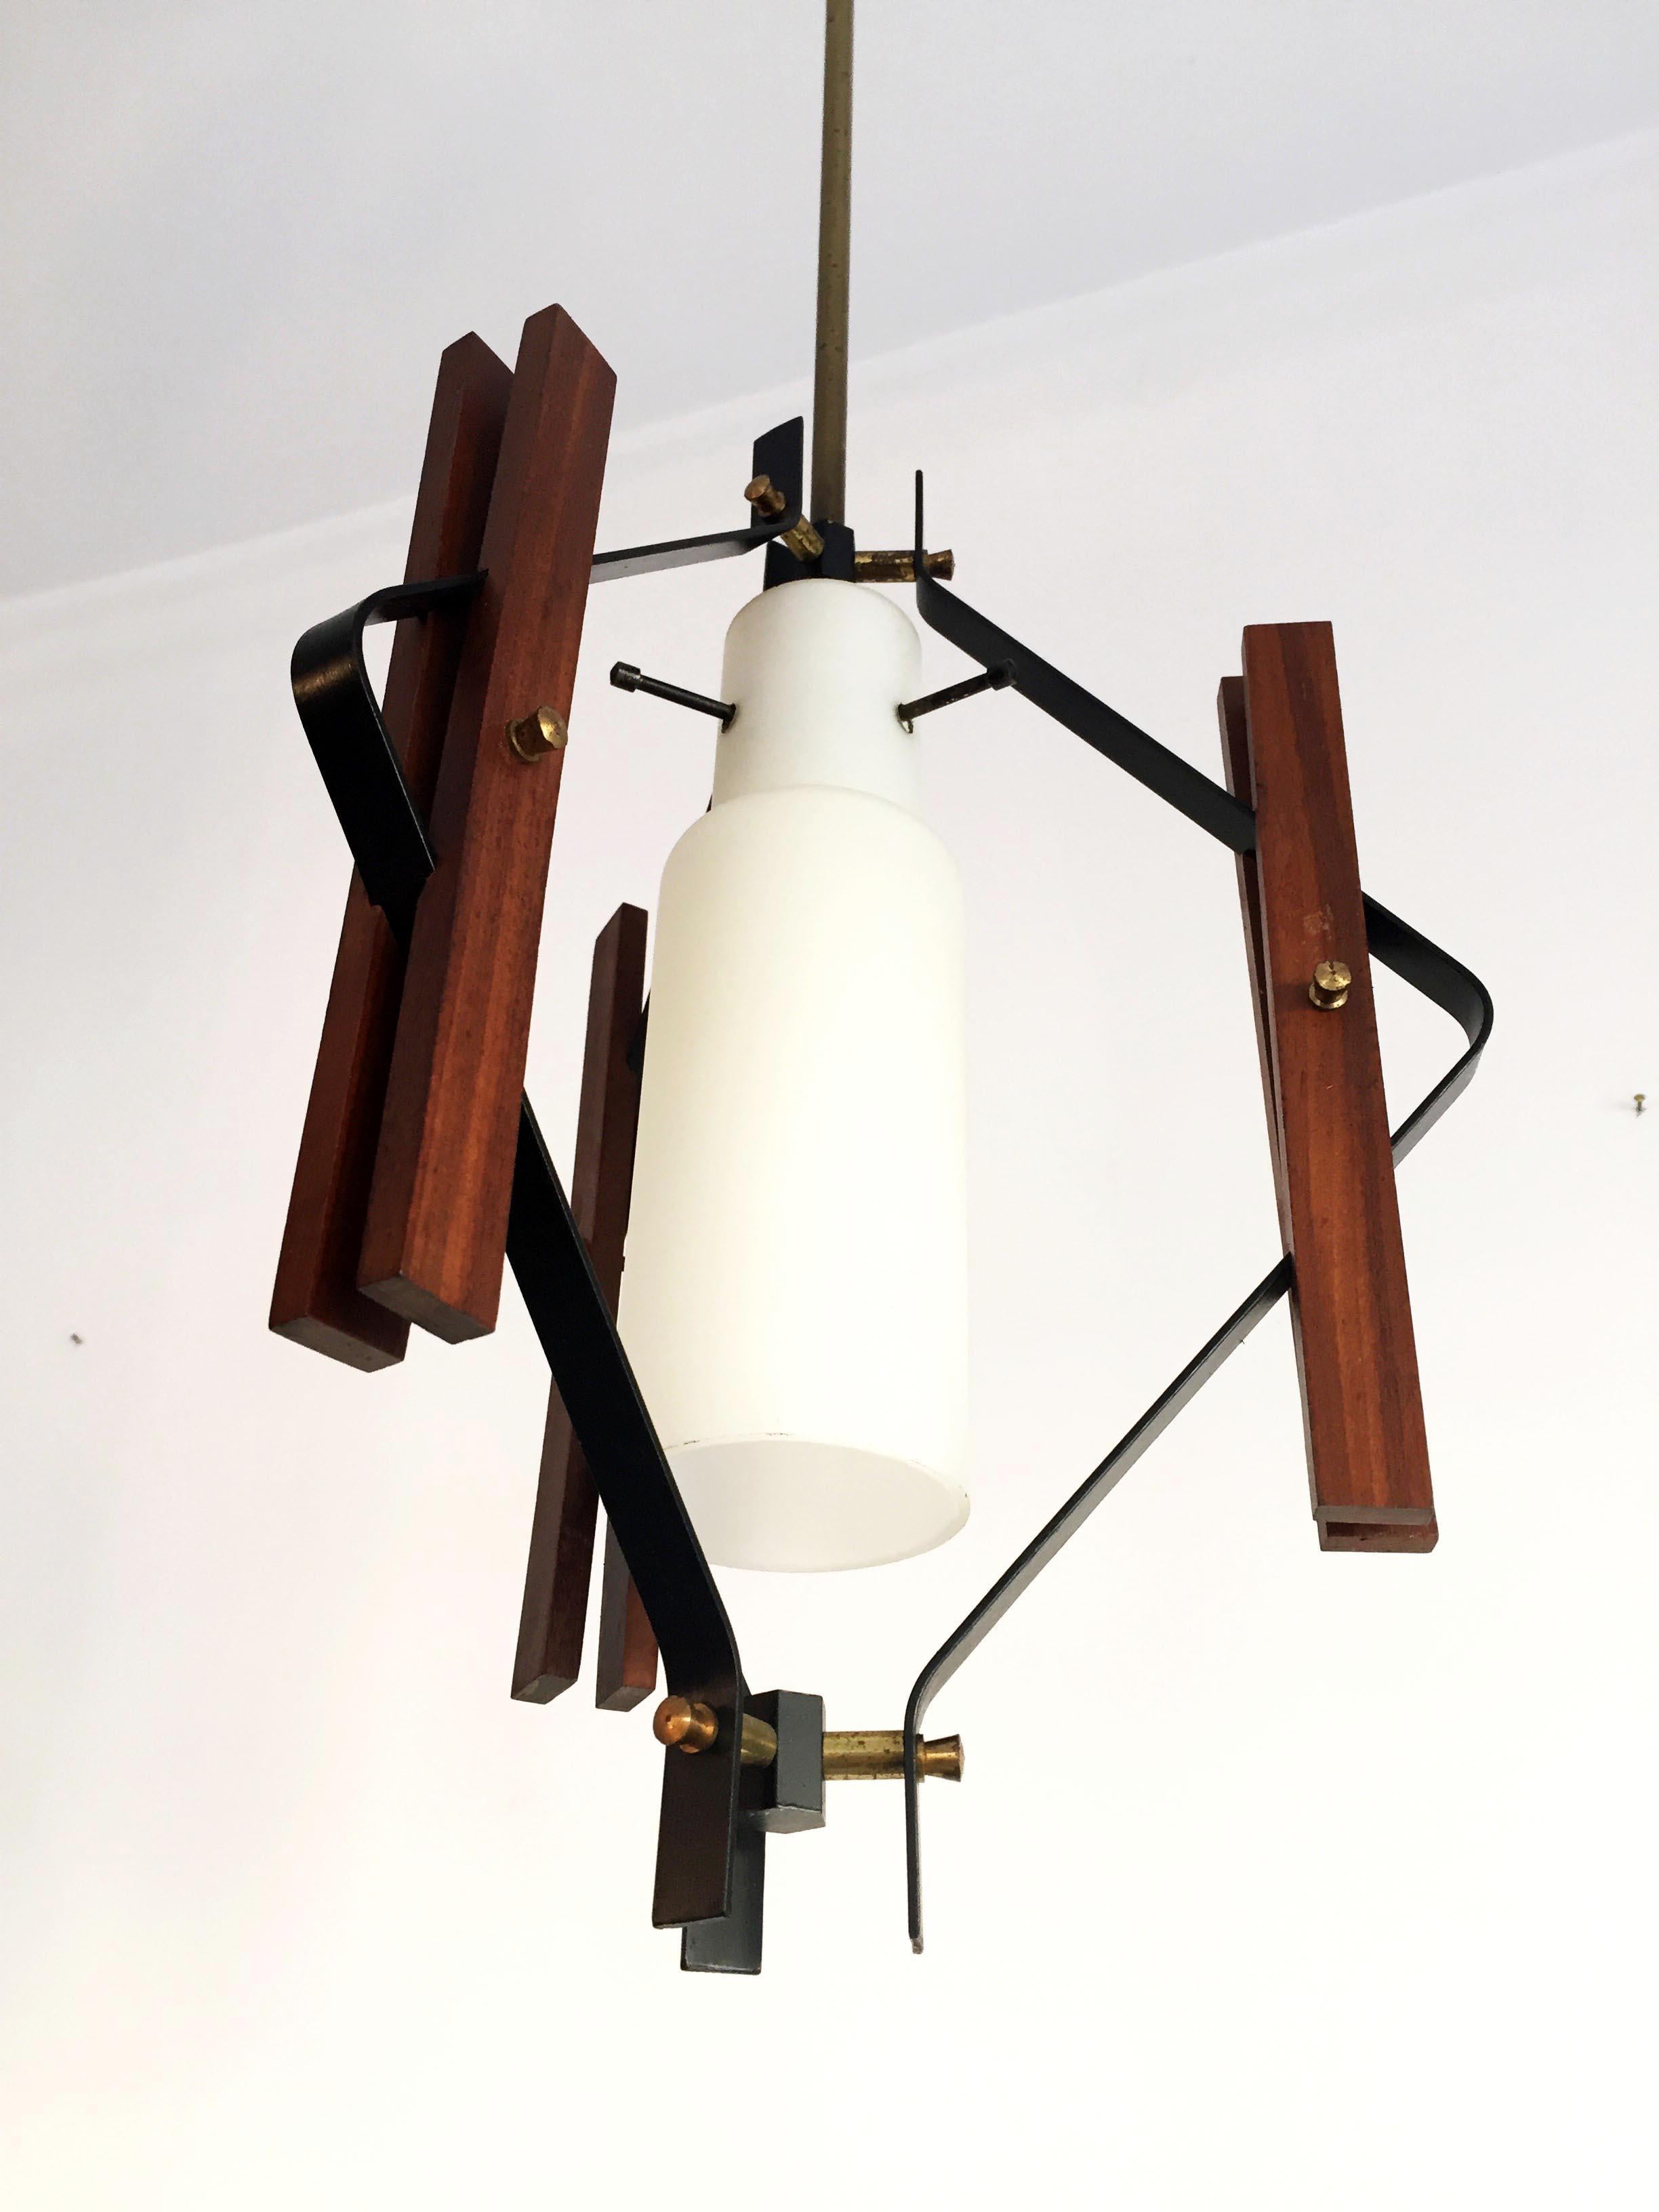 Italian Midcentury Ceiling Lamp in Teak Black Iron Opaline Glass and Brass Details, 1950 For Sale